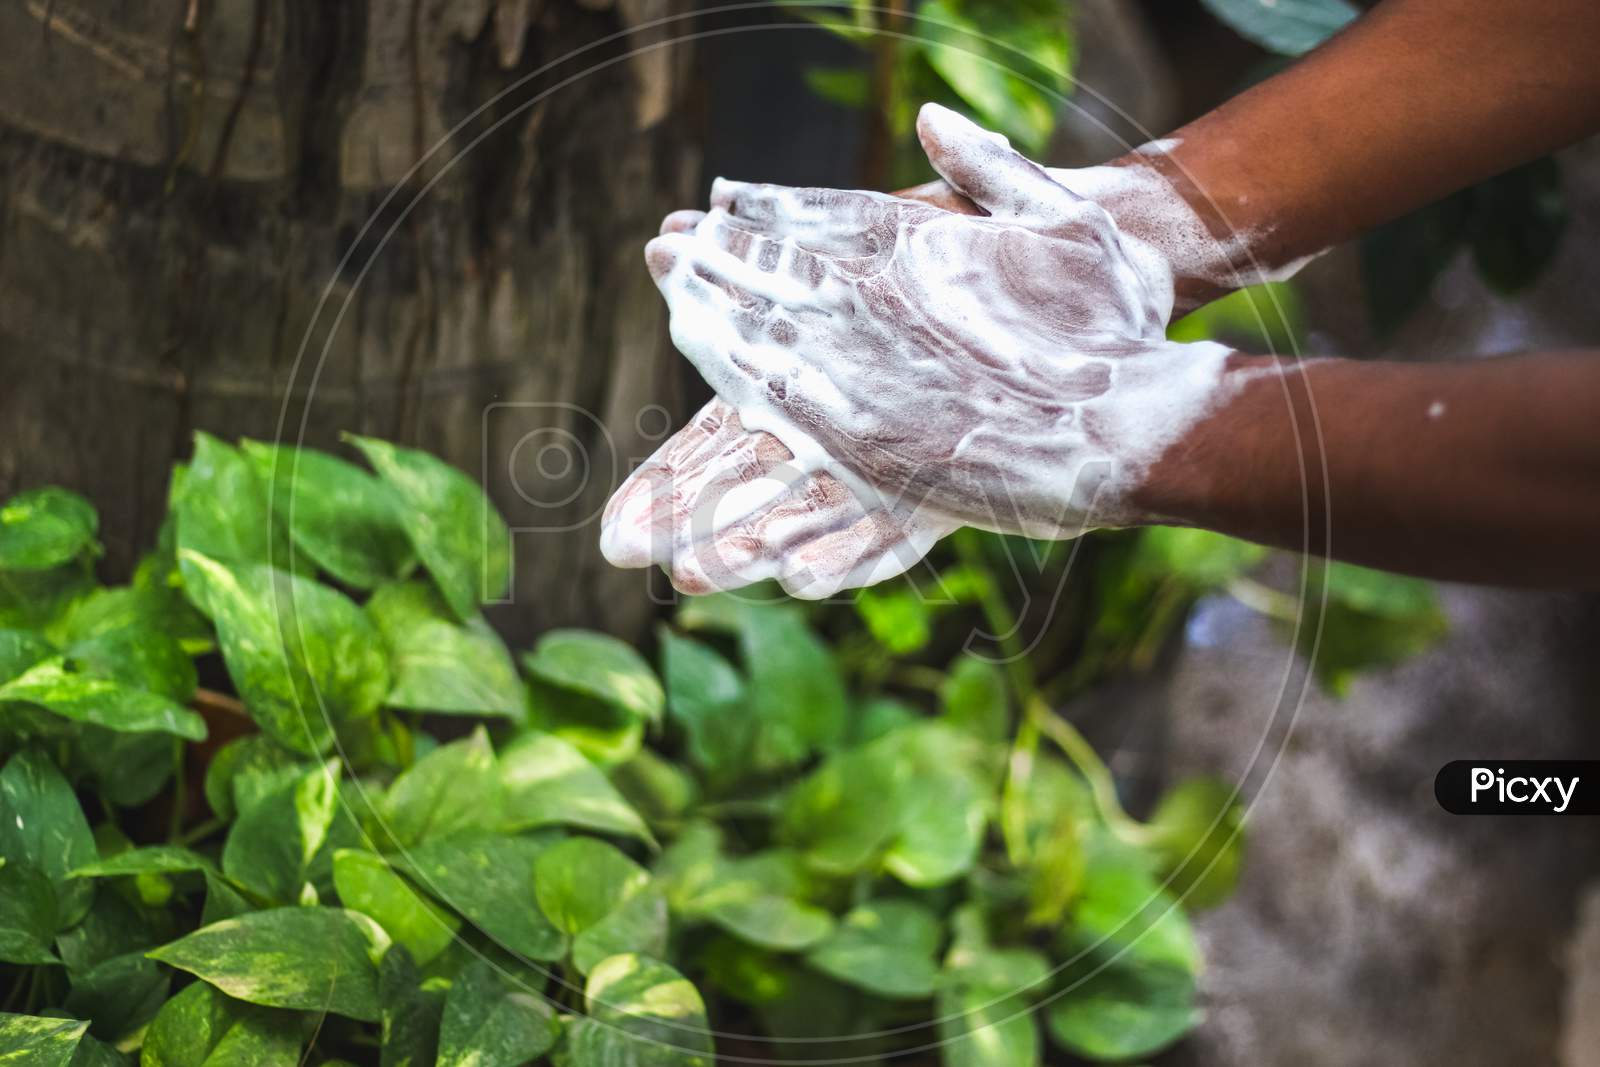 Washing Hands.Man Washing His Hands In The Garden At Home.Coronavirus Pandemic Prevention Wash Hands With Soap Warm Water And , Rubbing Nails And Fingers Washing Frequently. Hygiene & Cleaning Hands.